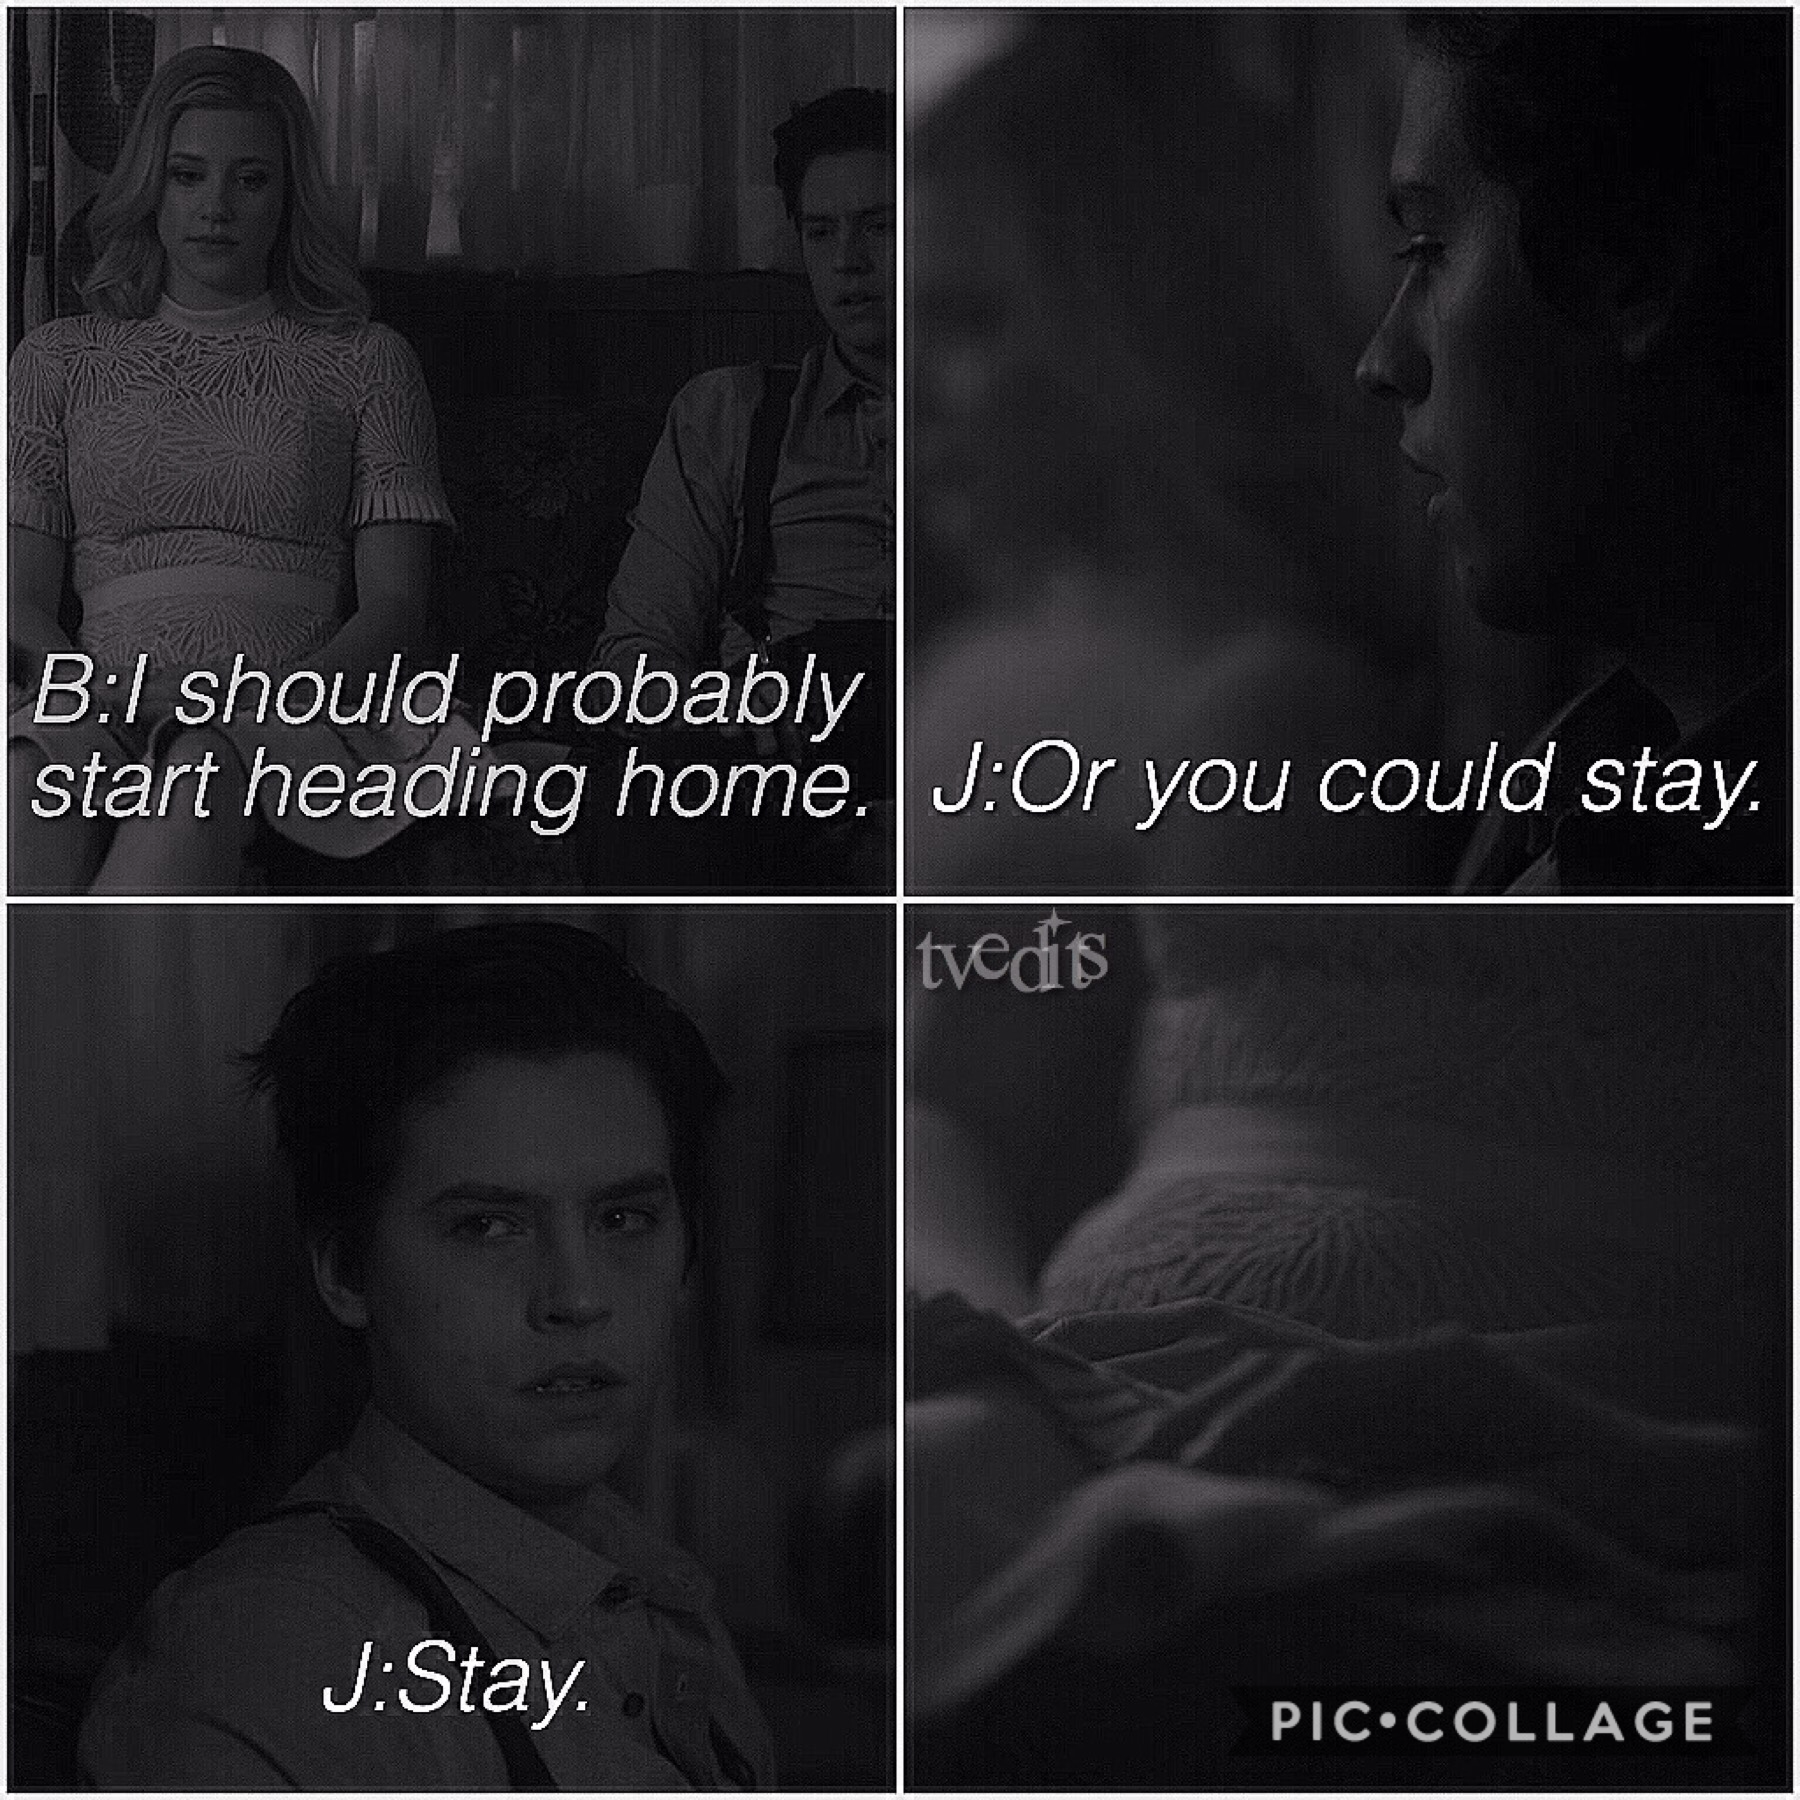 Tap me

This scene gave me so many feels like oml!!! Ugh bughead, one of my faves!💞😍right behind steroline😂 sorry. But it's true. Anyways, hope you had a great day!!